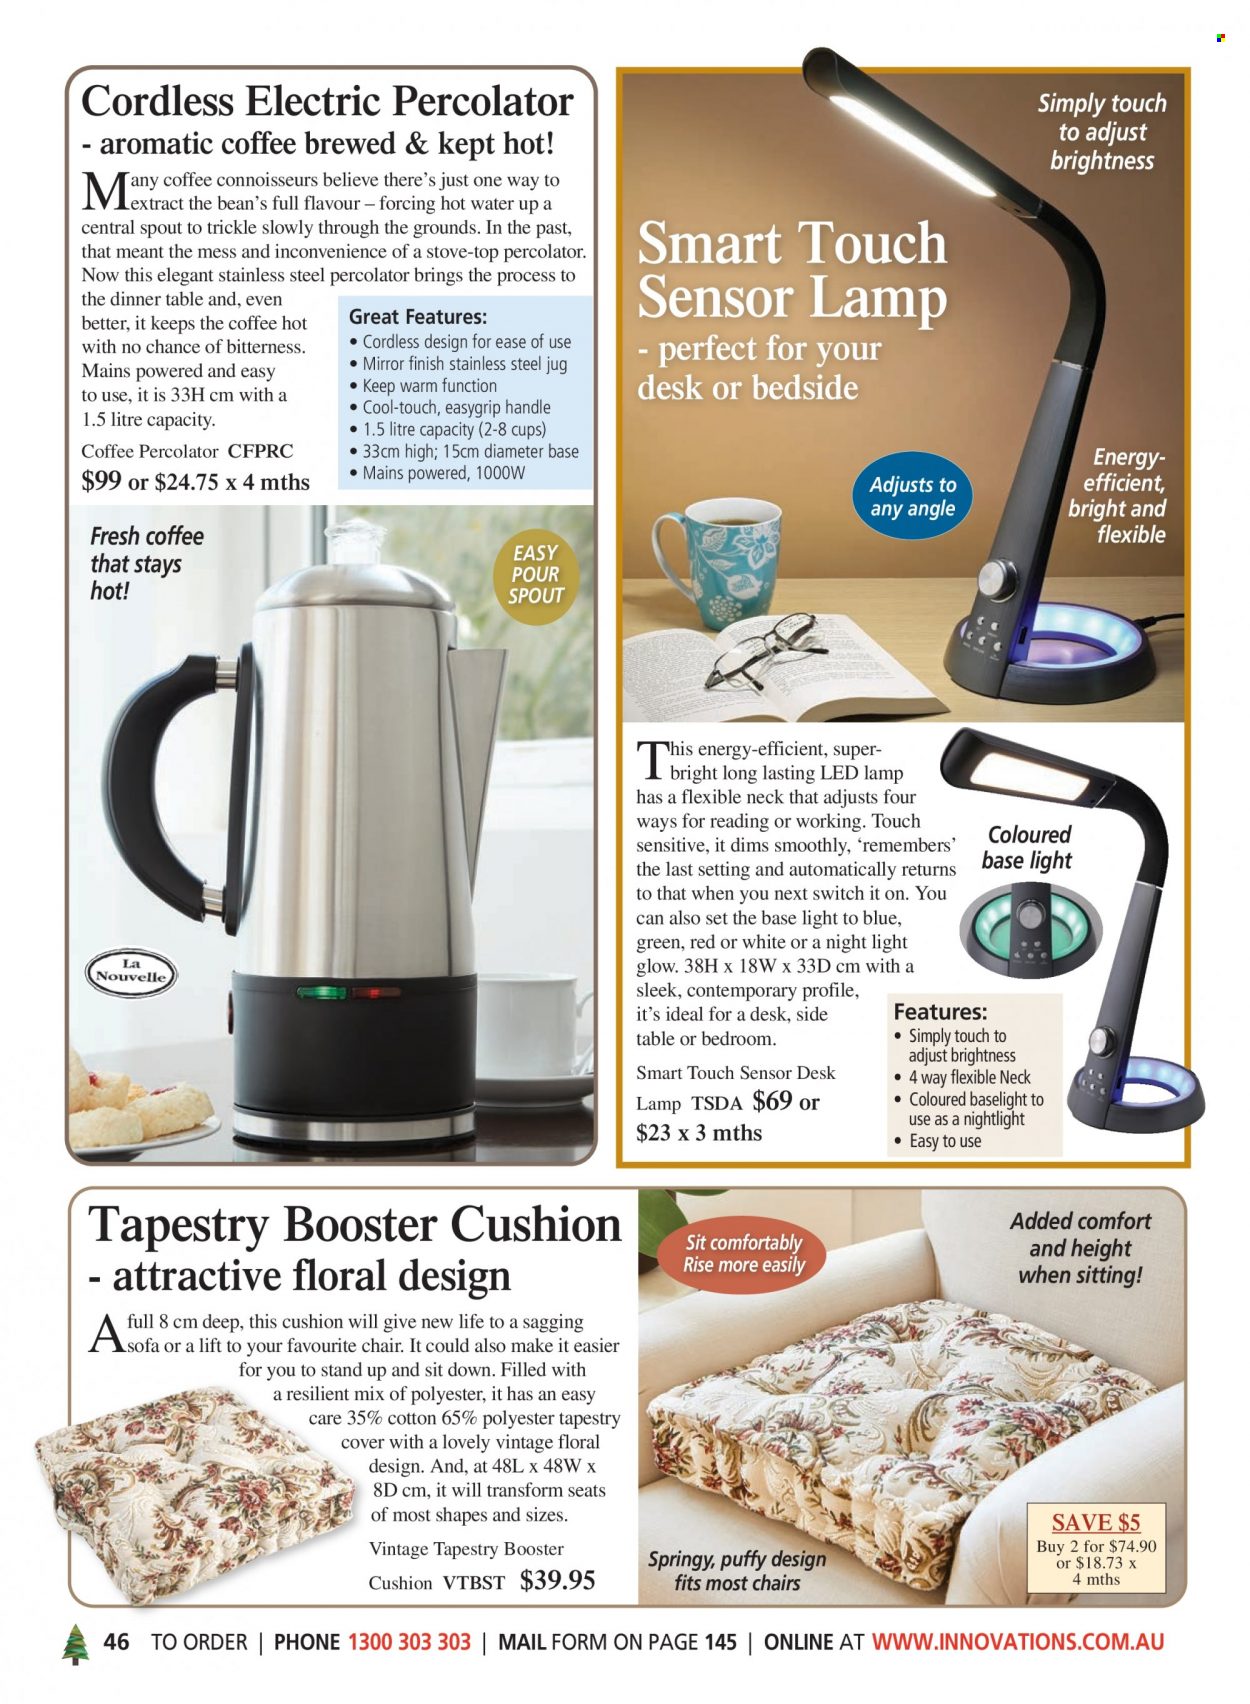 thumbnail - Innovations Catalogue - Sales products - cup, cushion, tapestry, lamp. Page 46.